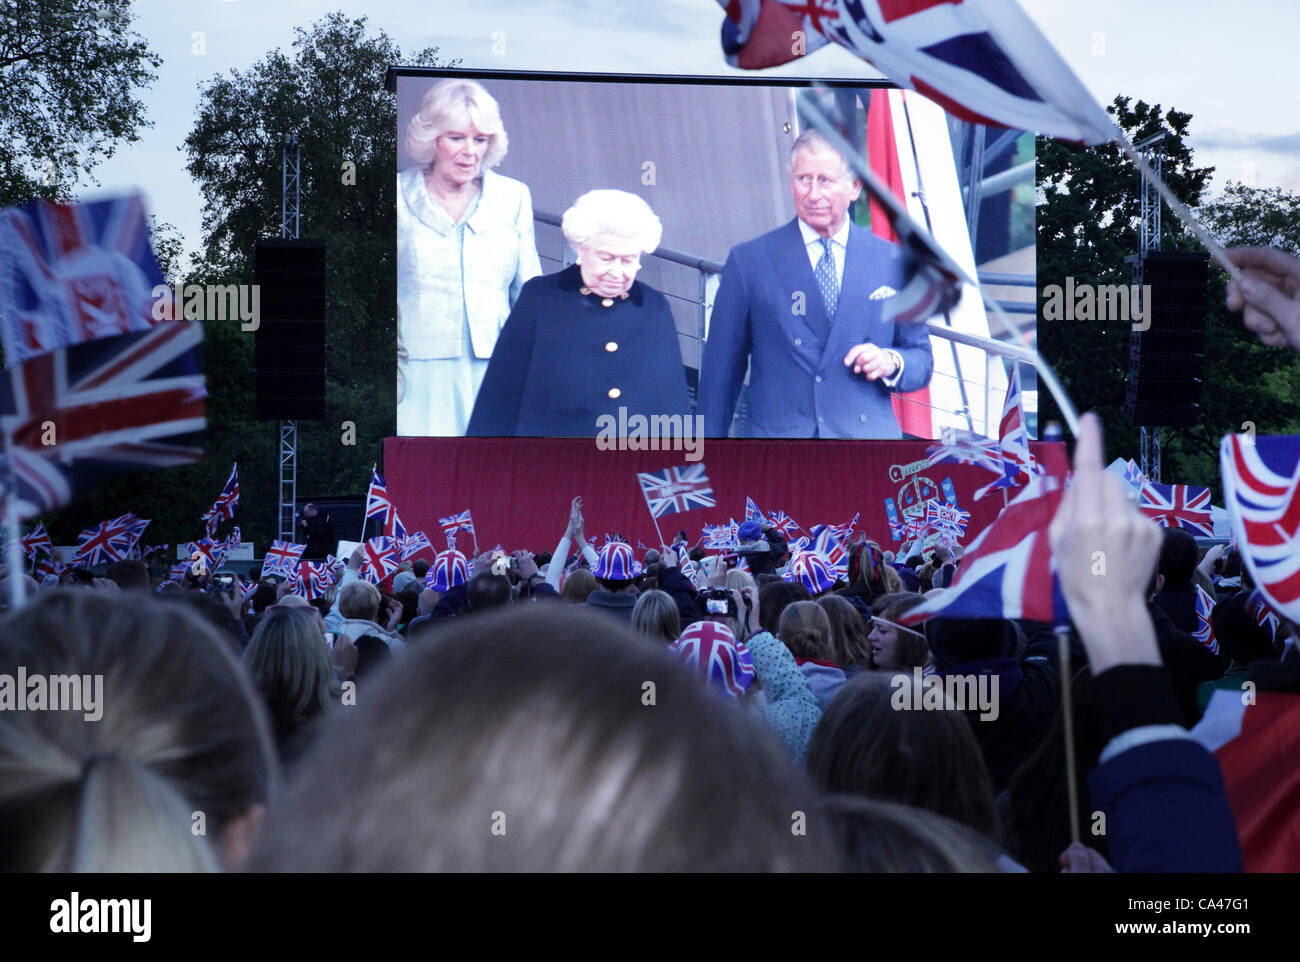 London, UK. June 4, 2012. Fans in St. James's Park, London. Watch on the big screens as The Queen, arrive at the Diamond Jubilee concert , with The Price of Wales and The Duchess of Cornwall. Stock Photo